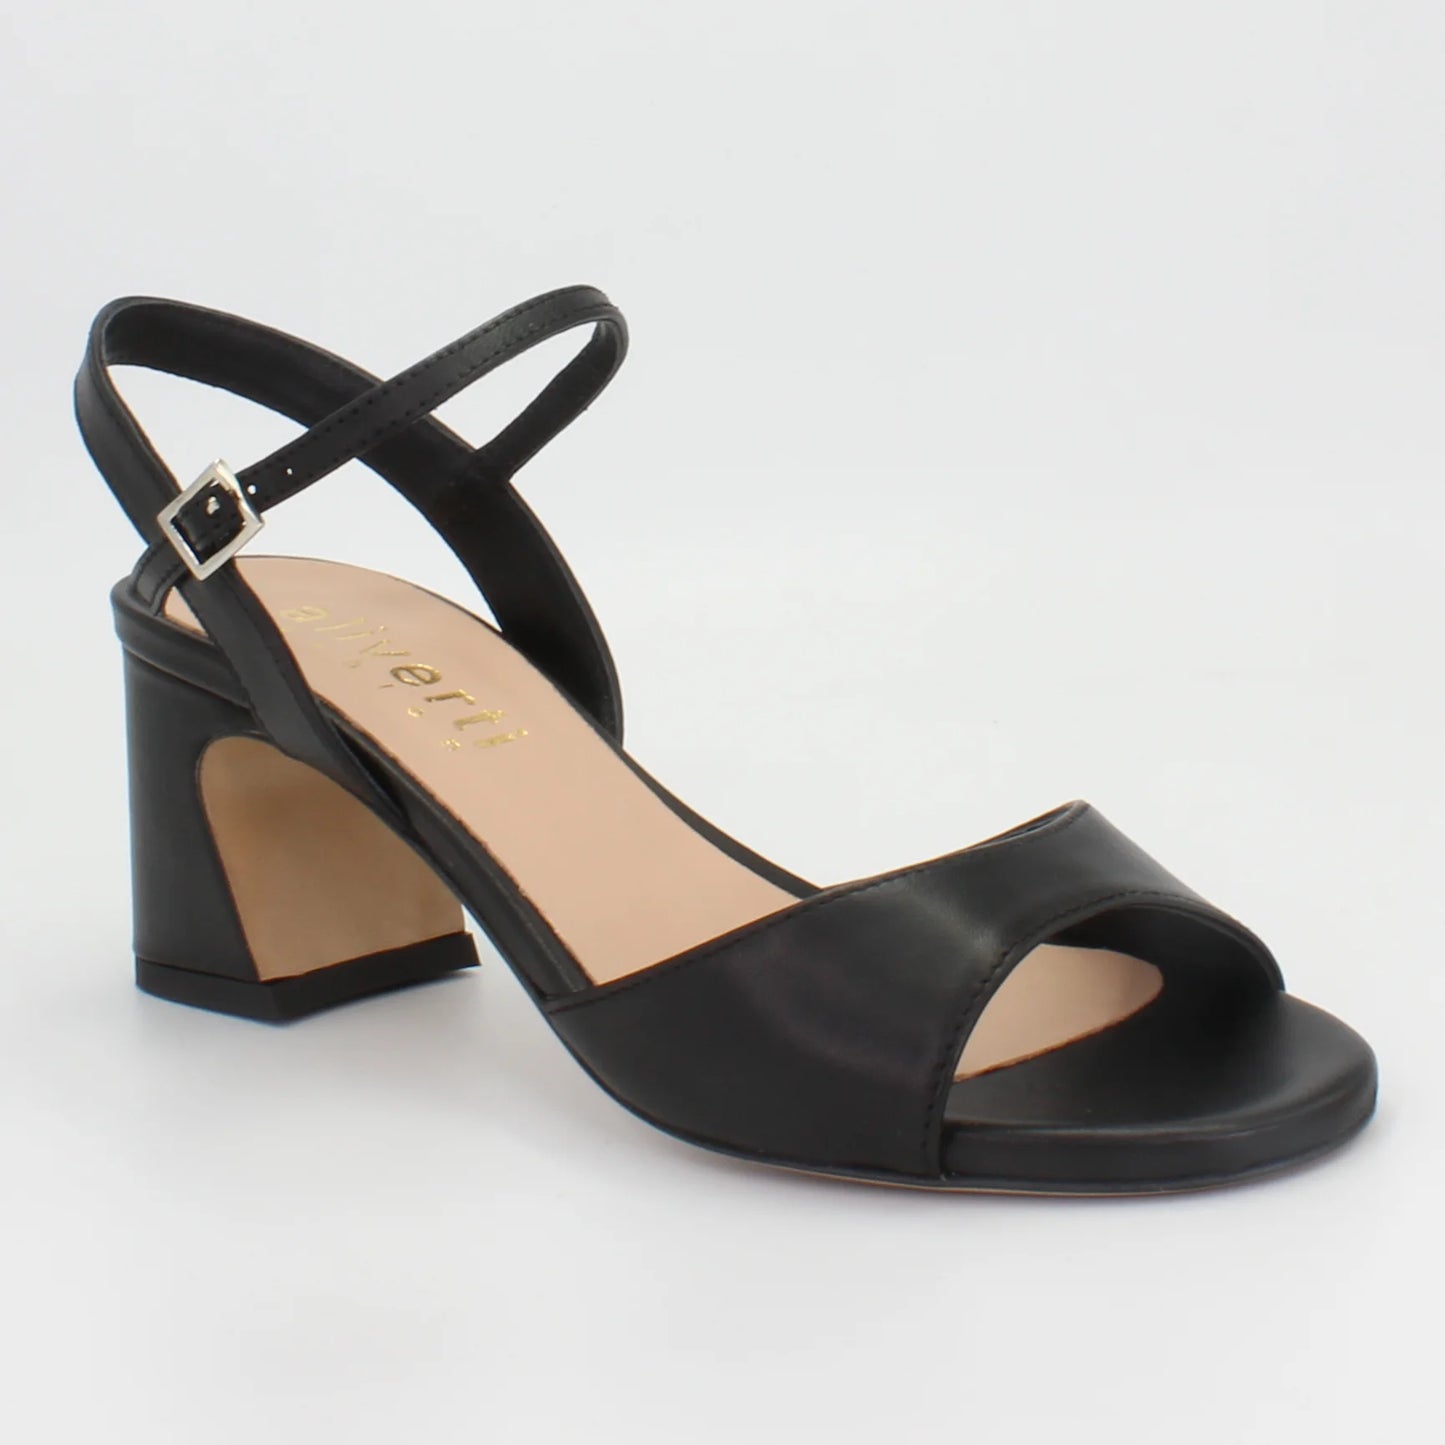 Shop Handmade Italian Leather block heel in nero nappa (ALETA 5) or browse our range of hand-made Italian shoes in leather or suede in-store at Aliverti Cape Town, or shop online. We deliver in South Africa & offer multiple payment plans as well as accept multiple safe & secure payment methods.